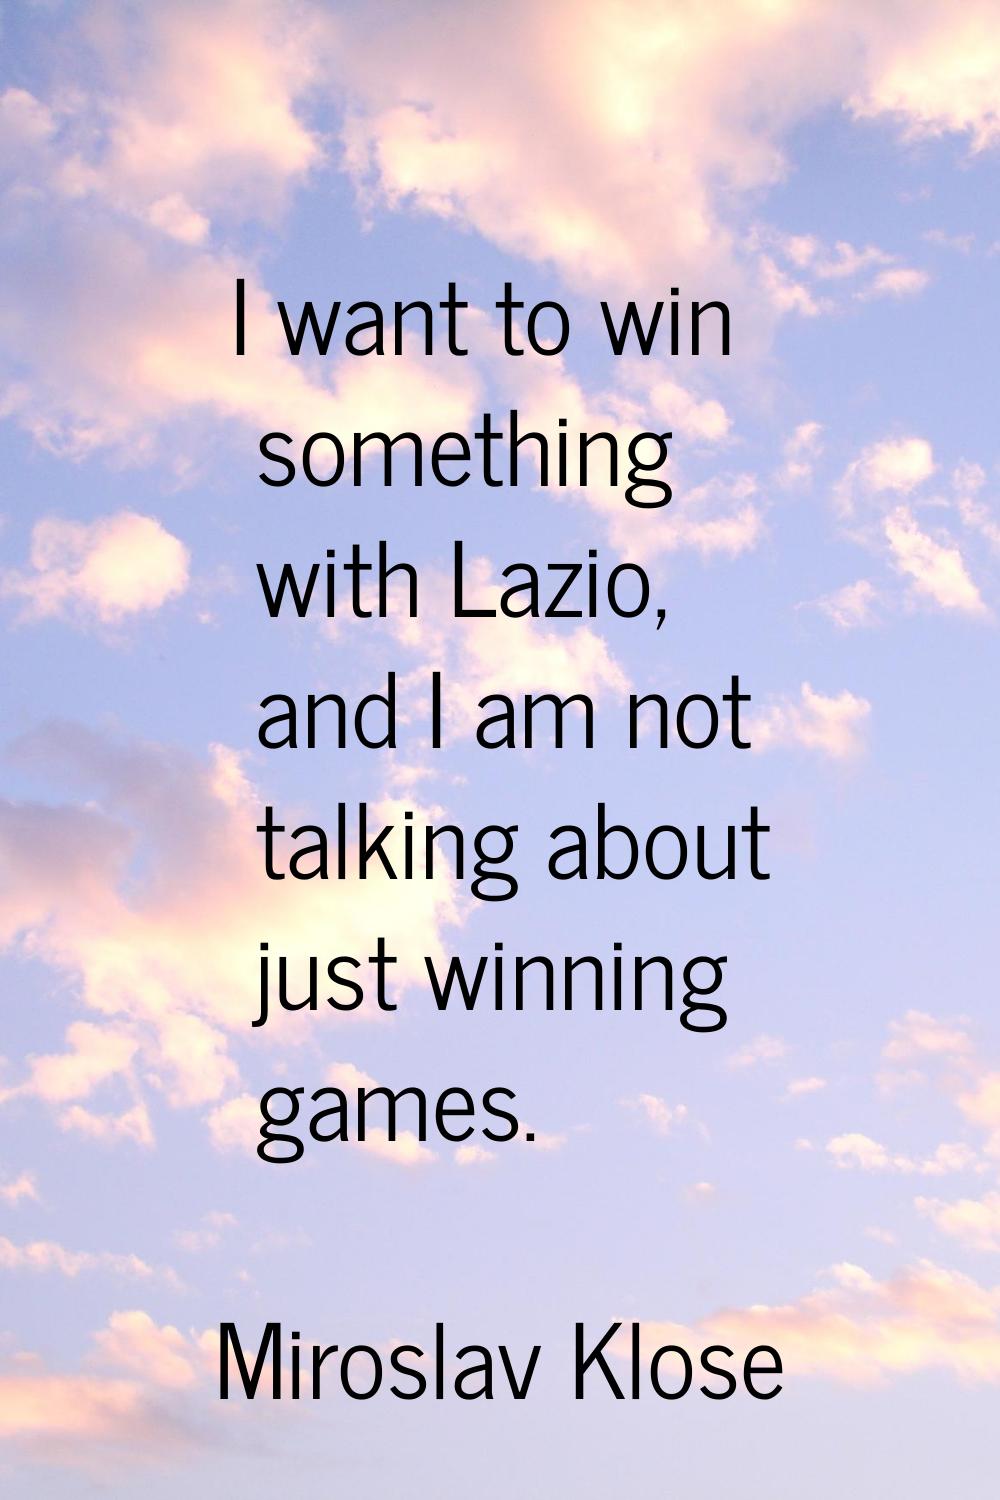 I want to win something with Lazio, and I am not talking about just winning games.